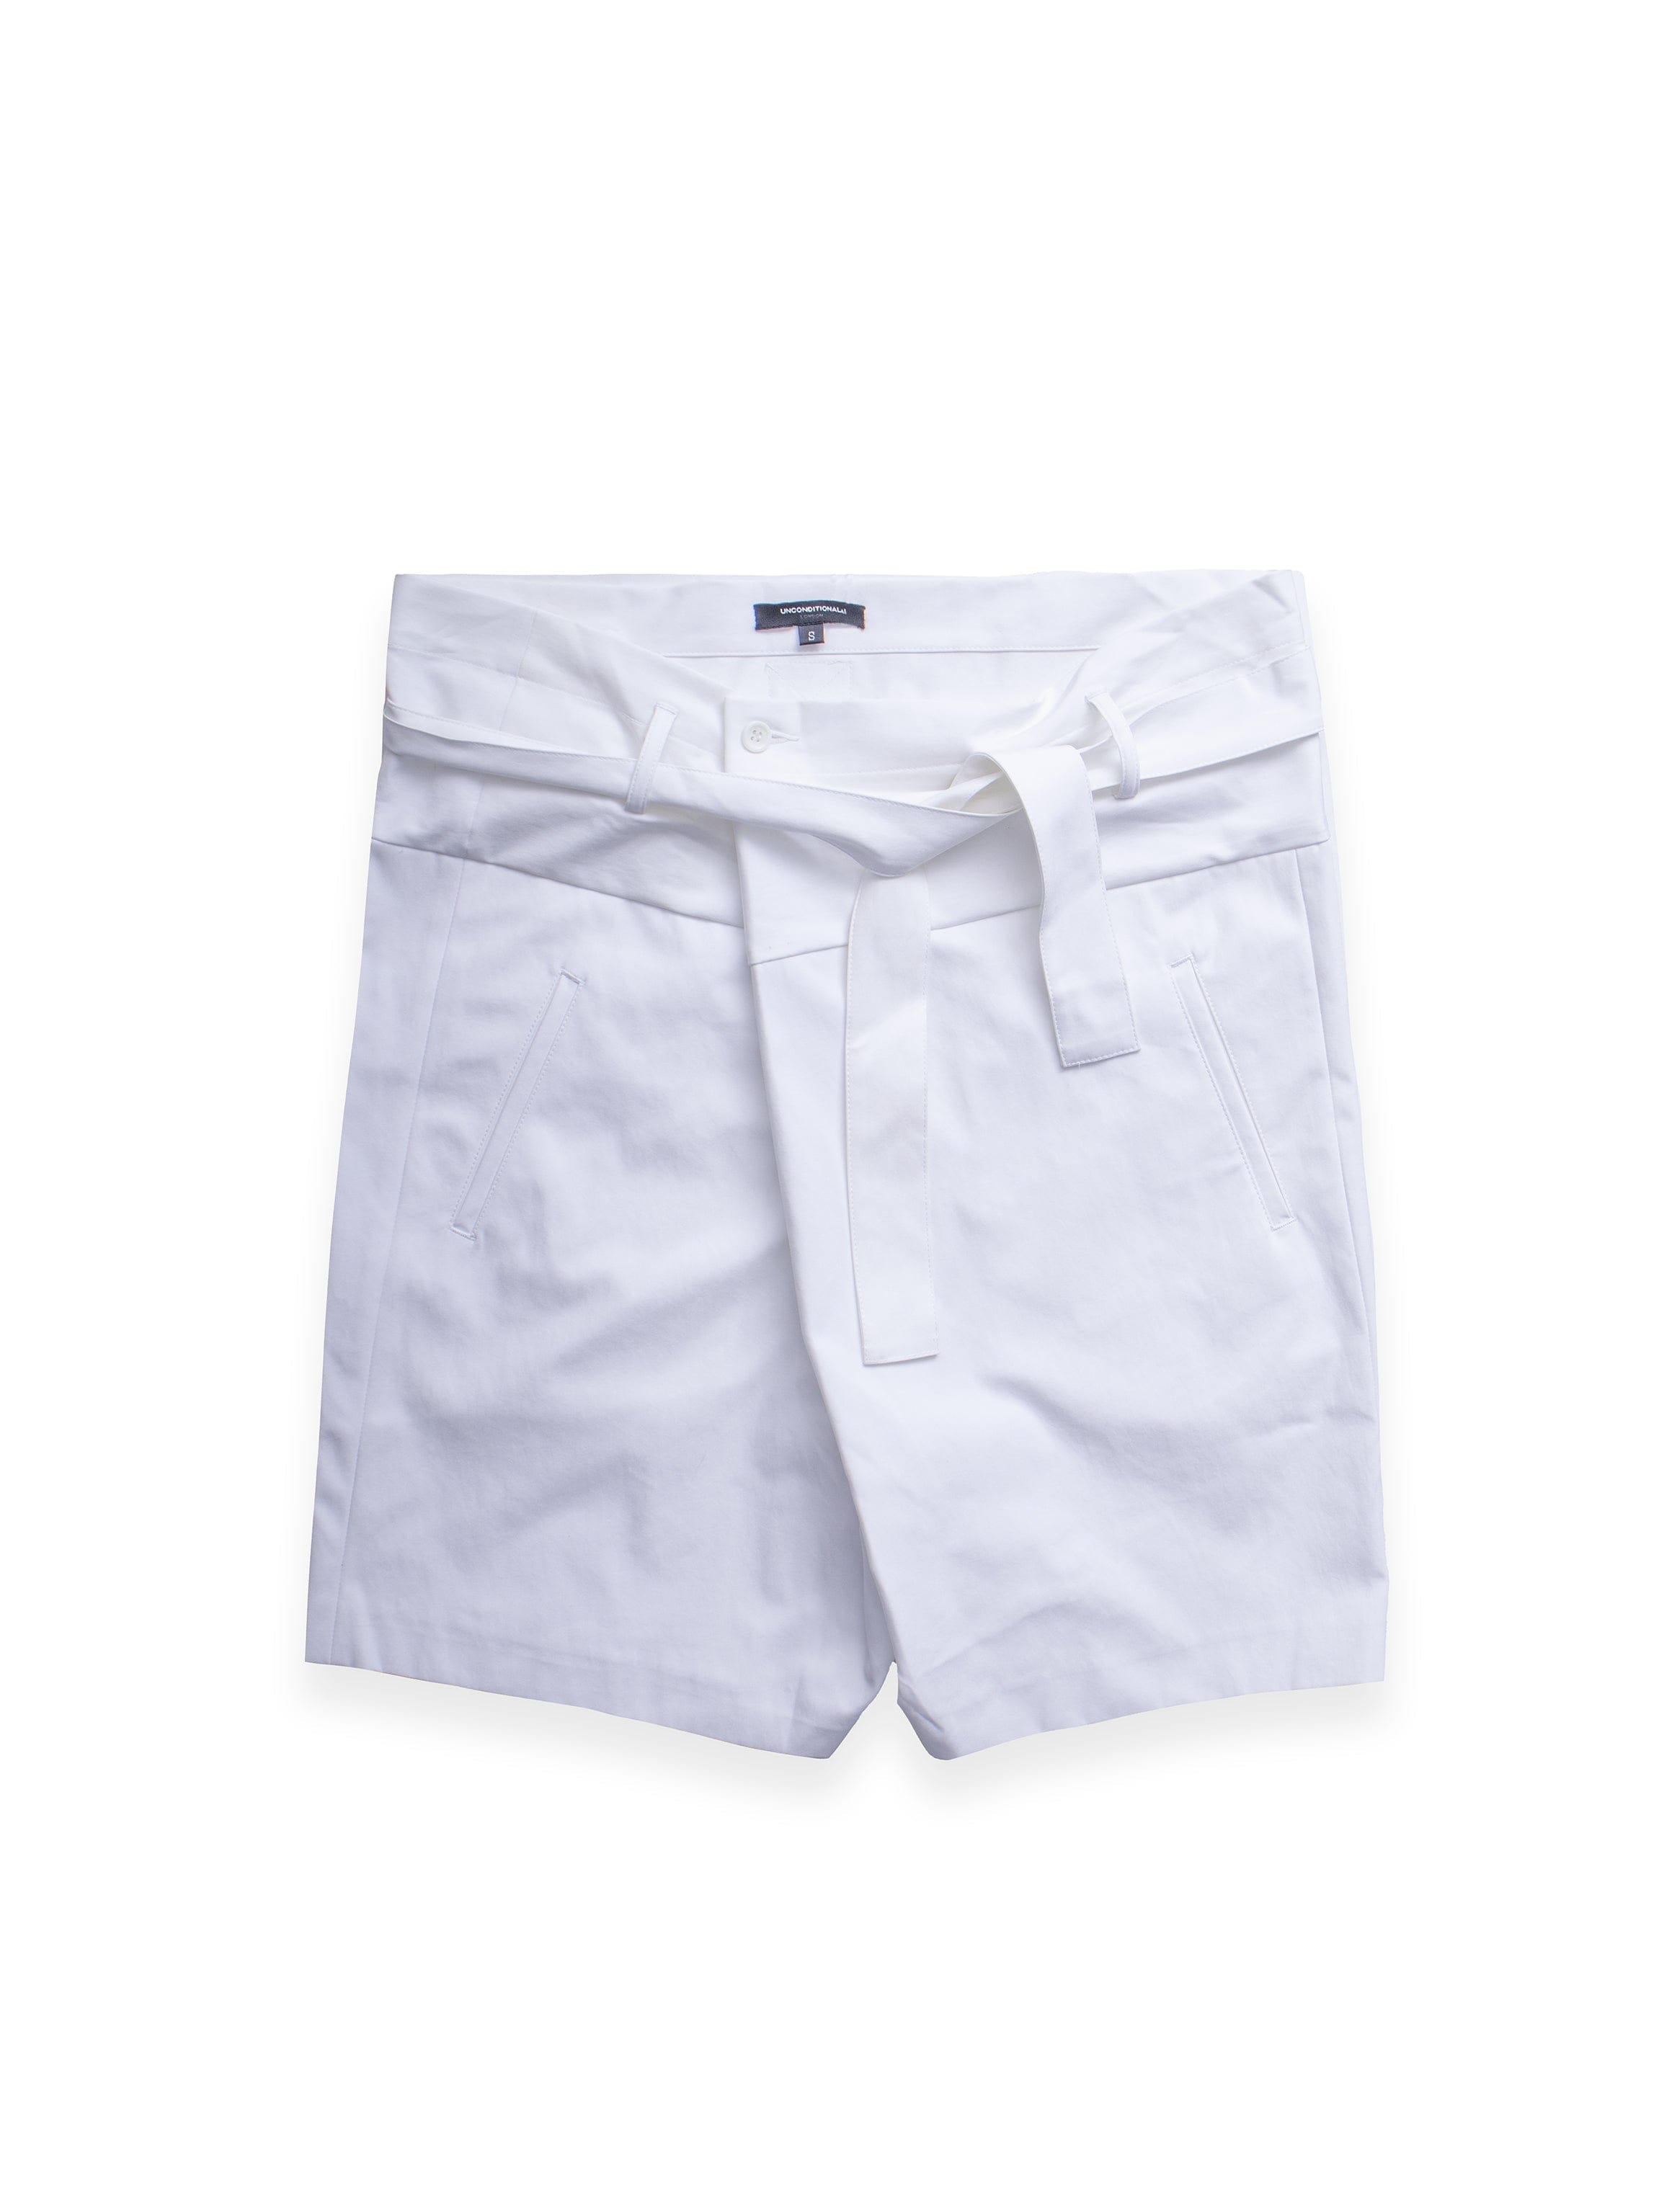 White Button Up Shorts with Tie Up Waist Detail